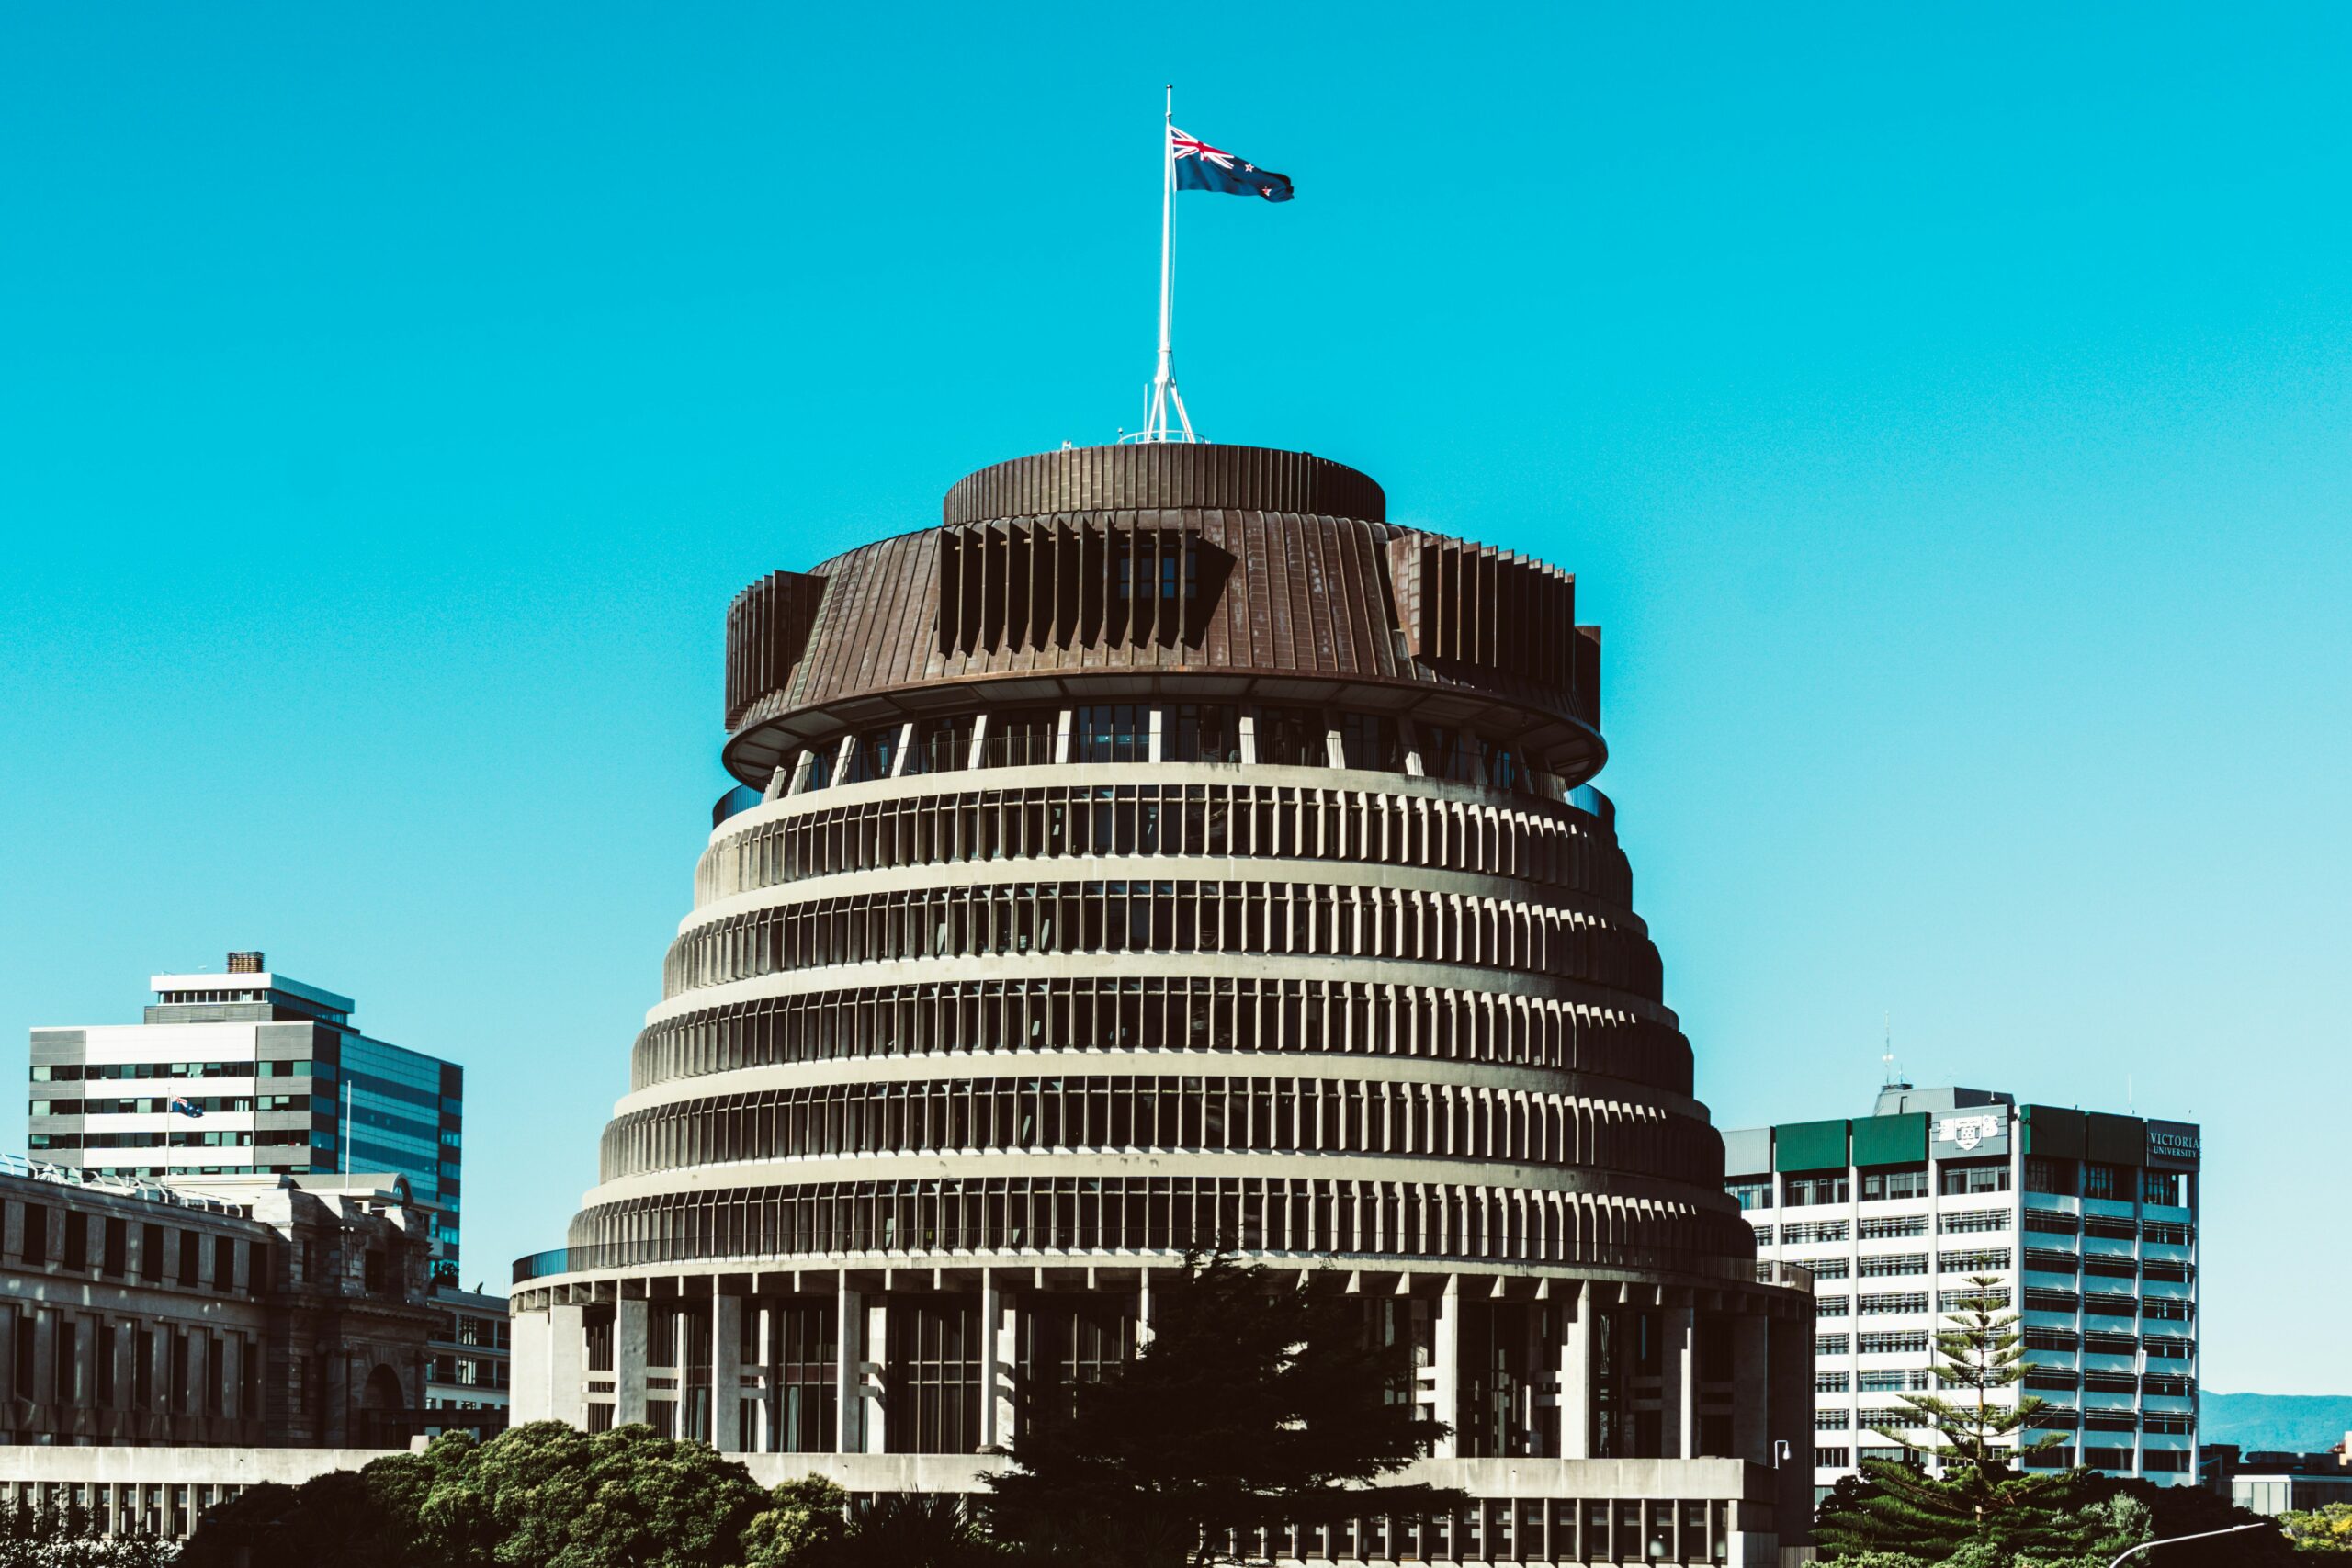 NZ Budget announces tax relief package to thousands of New Zealanders.